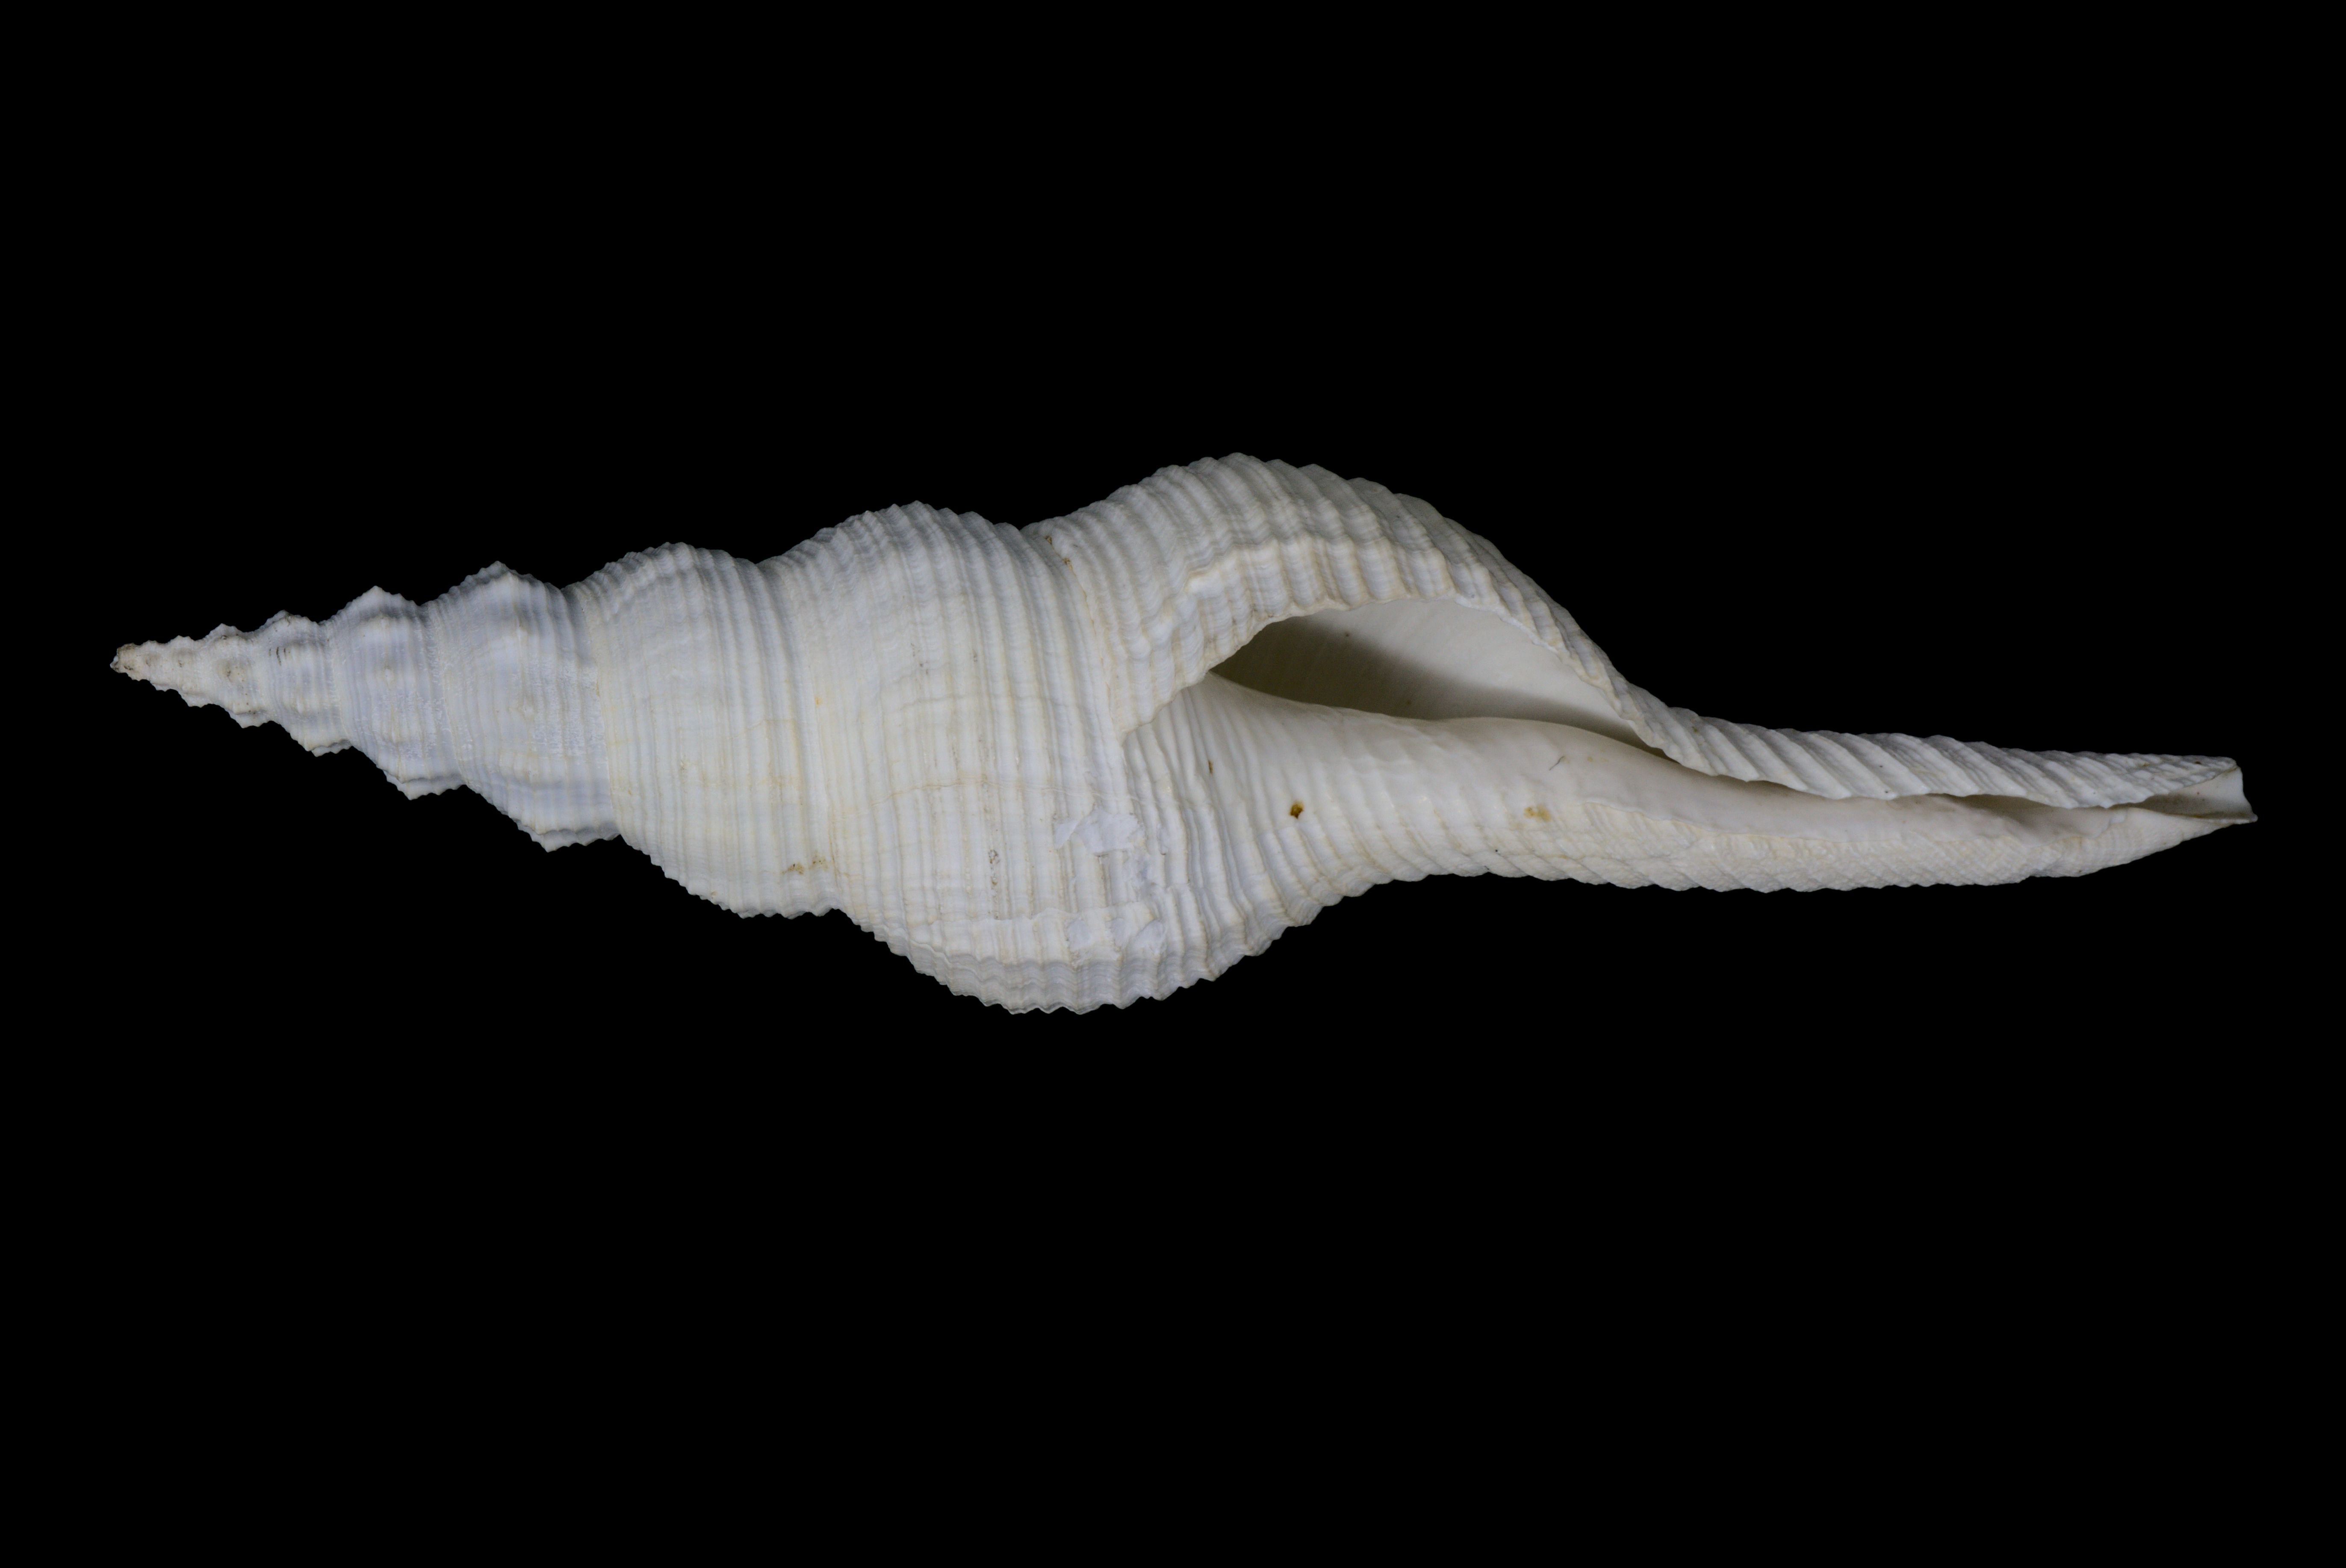 a long-tailed spindle sea snail Fusinus colus